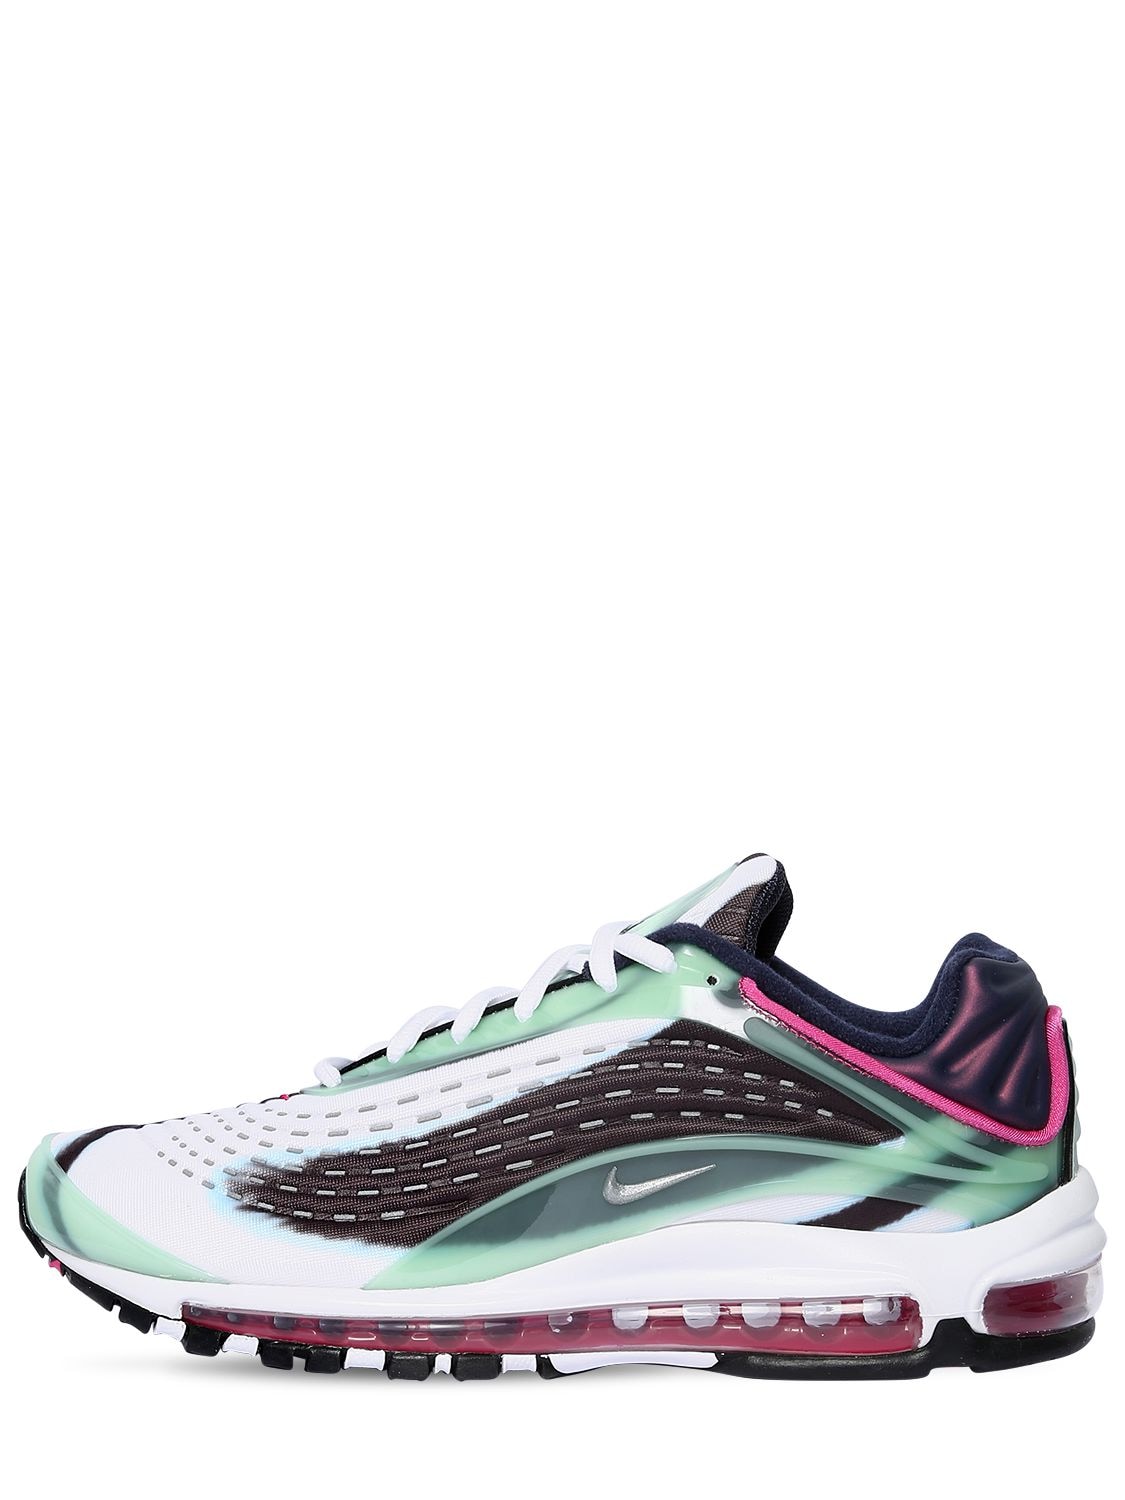 Nike Air Max Deluxe Sneakers In White/green